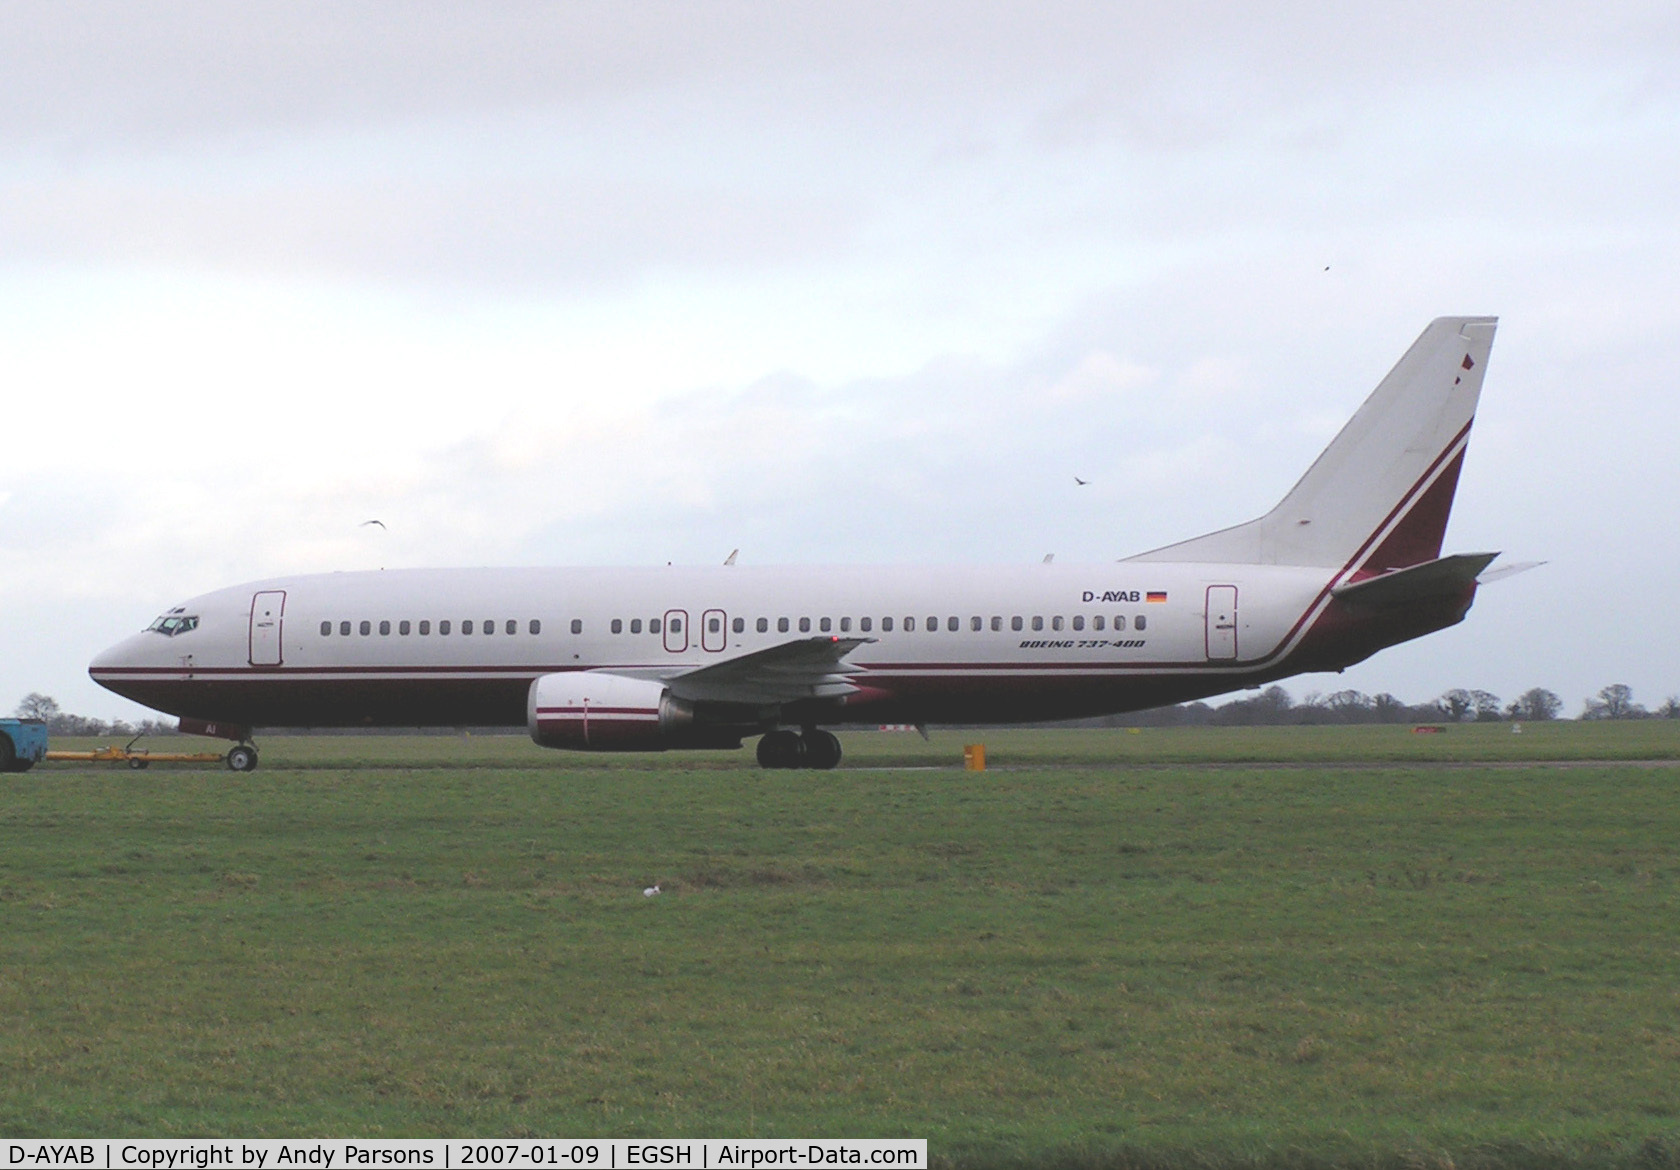 D-AYAB, 1996 Boeing 737-46J C/N 28038, This reg only carried for a few weeks whilst in storage